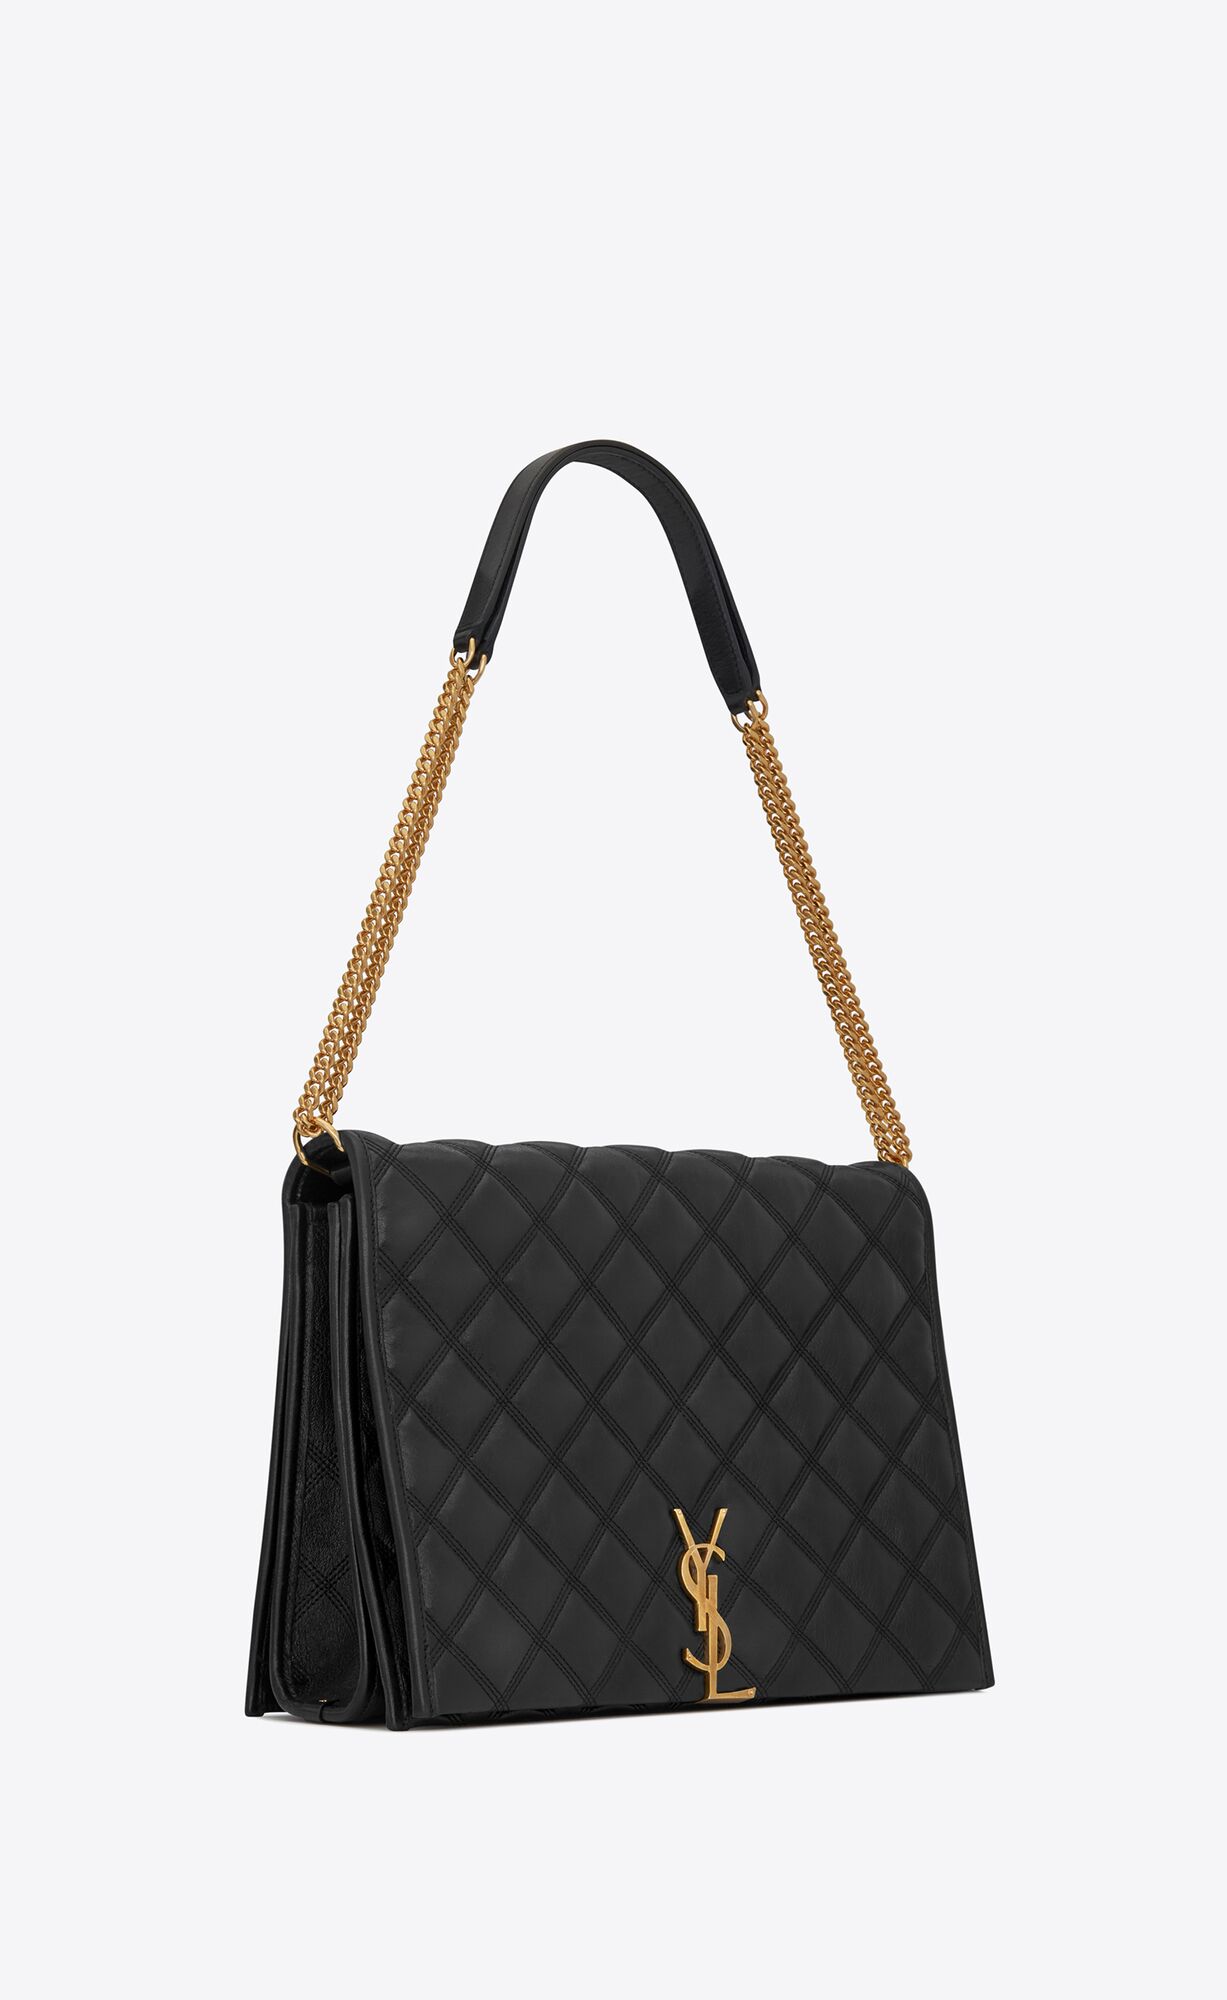 BECKY Large chain bag in quilted lambskin | Saint Laurent United States ...